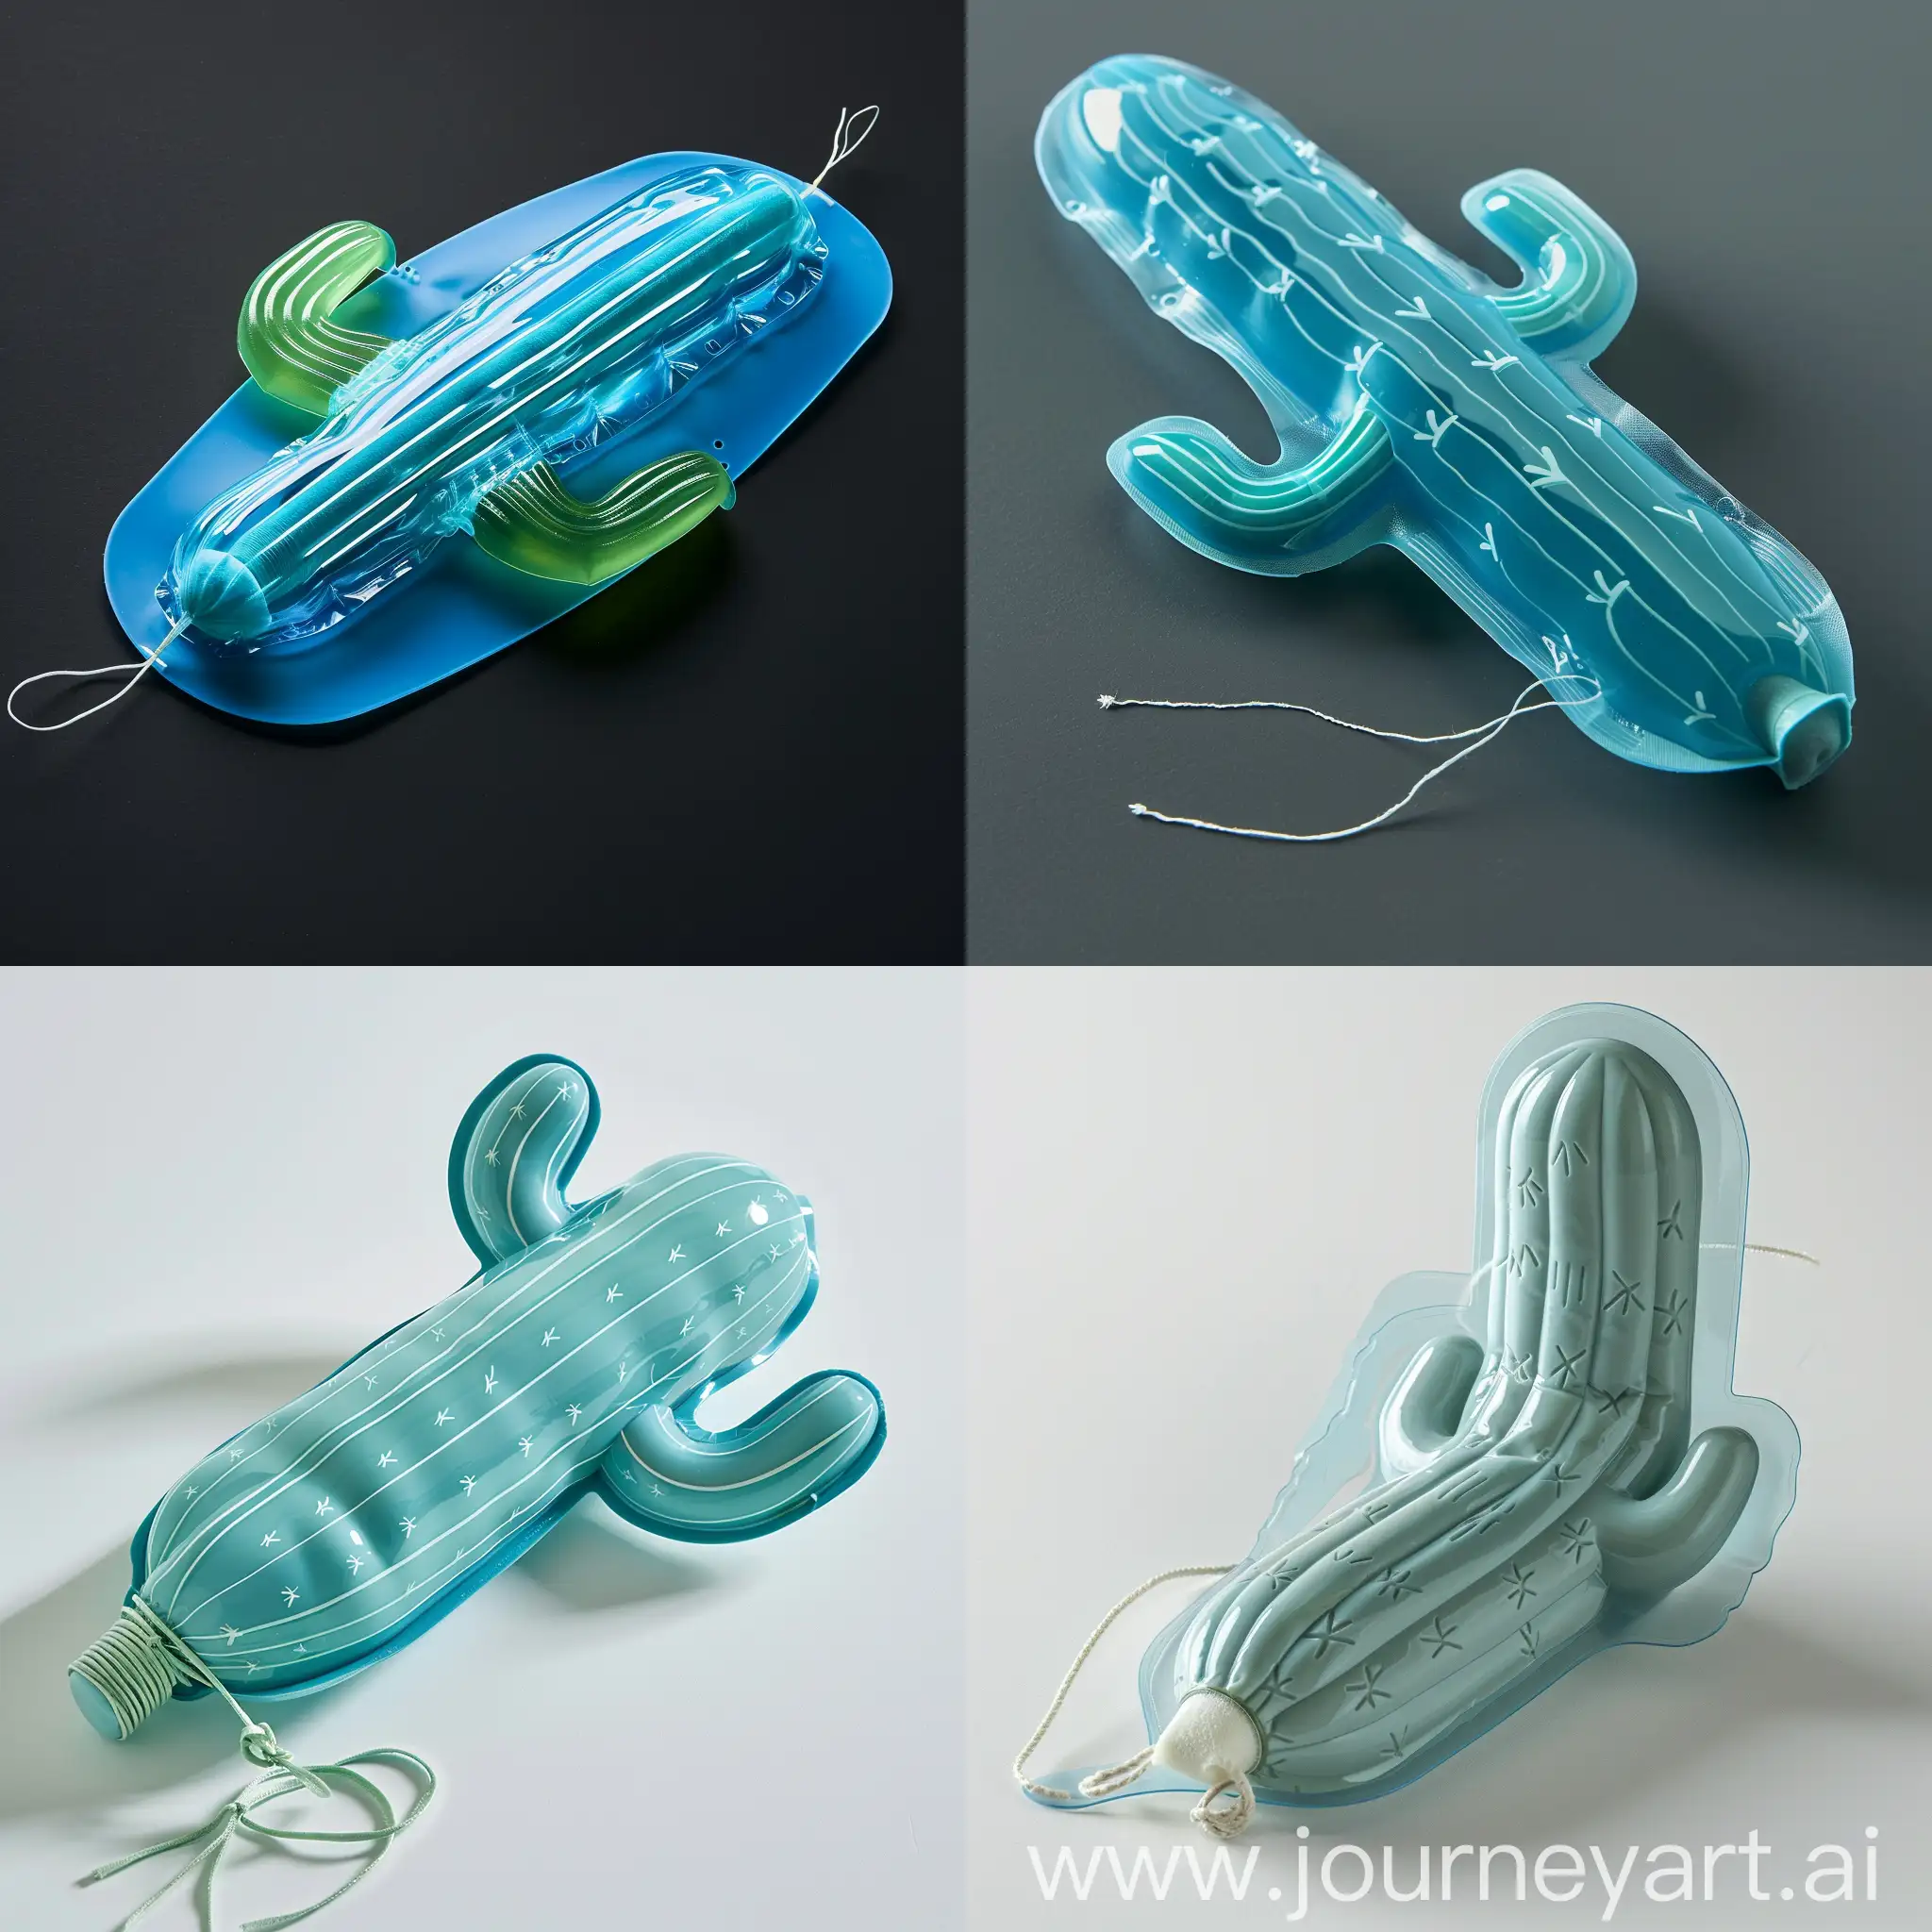 CactusShaped-Tampon-Product-in-Blue-Plastic-Cover-with-String